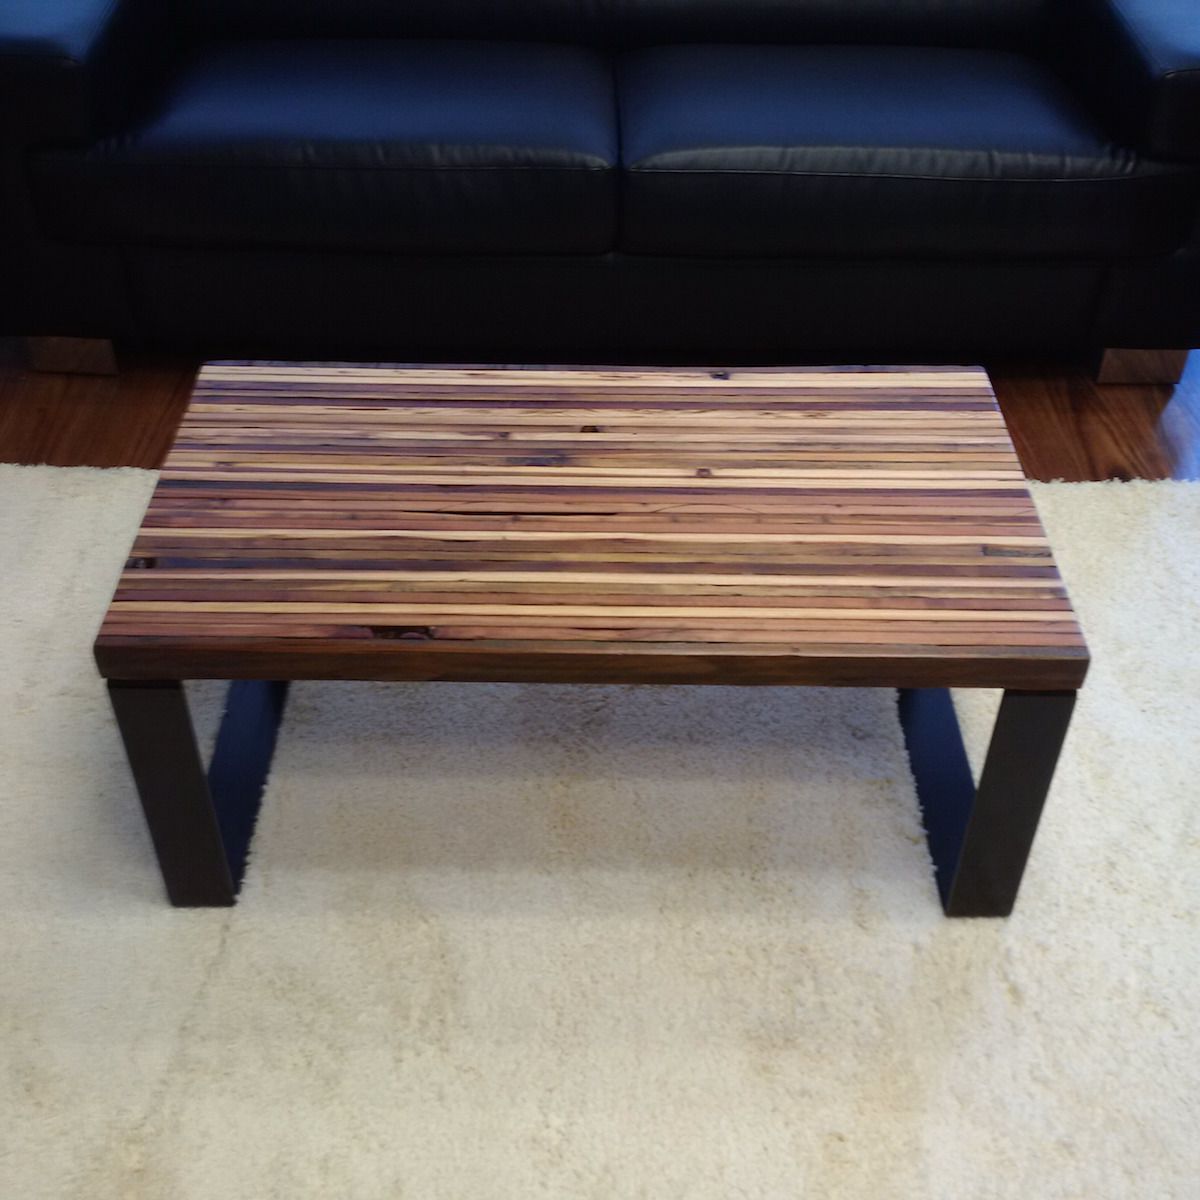 Buy A Custom Reclaimed Barn Wood Coffee Table, Made To Intended For Fashionable Barnwood Coffee Tables (Gallery 18 of 20)